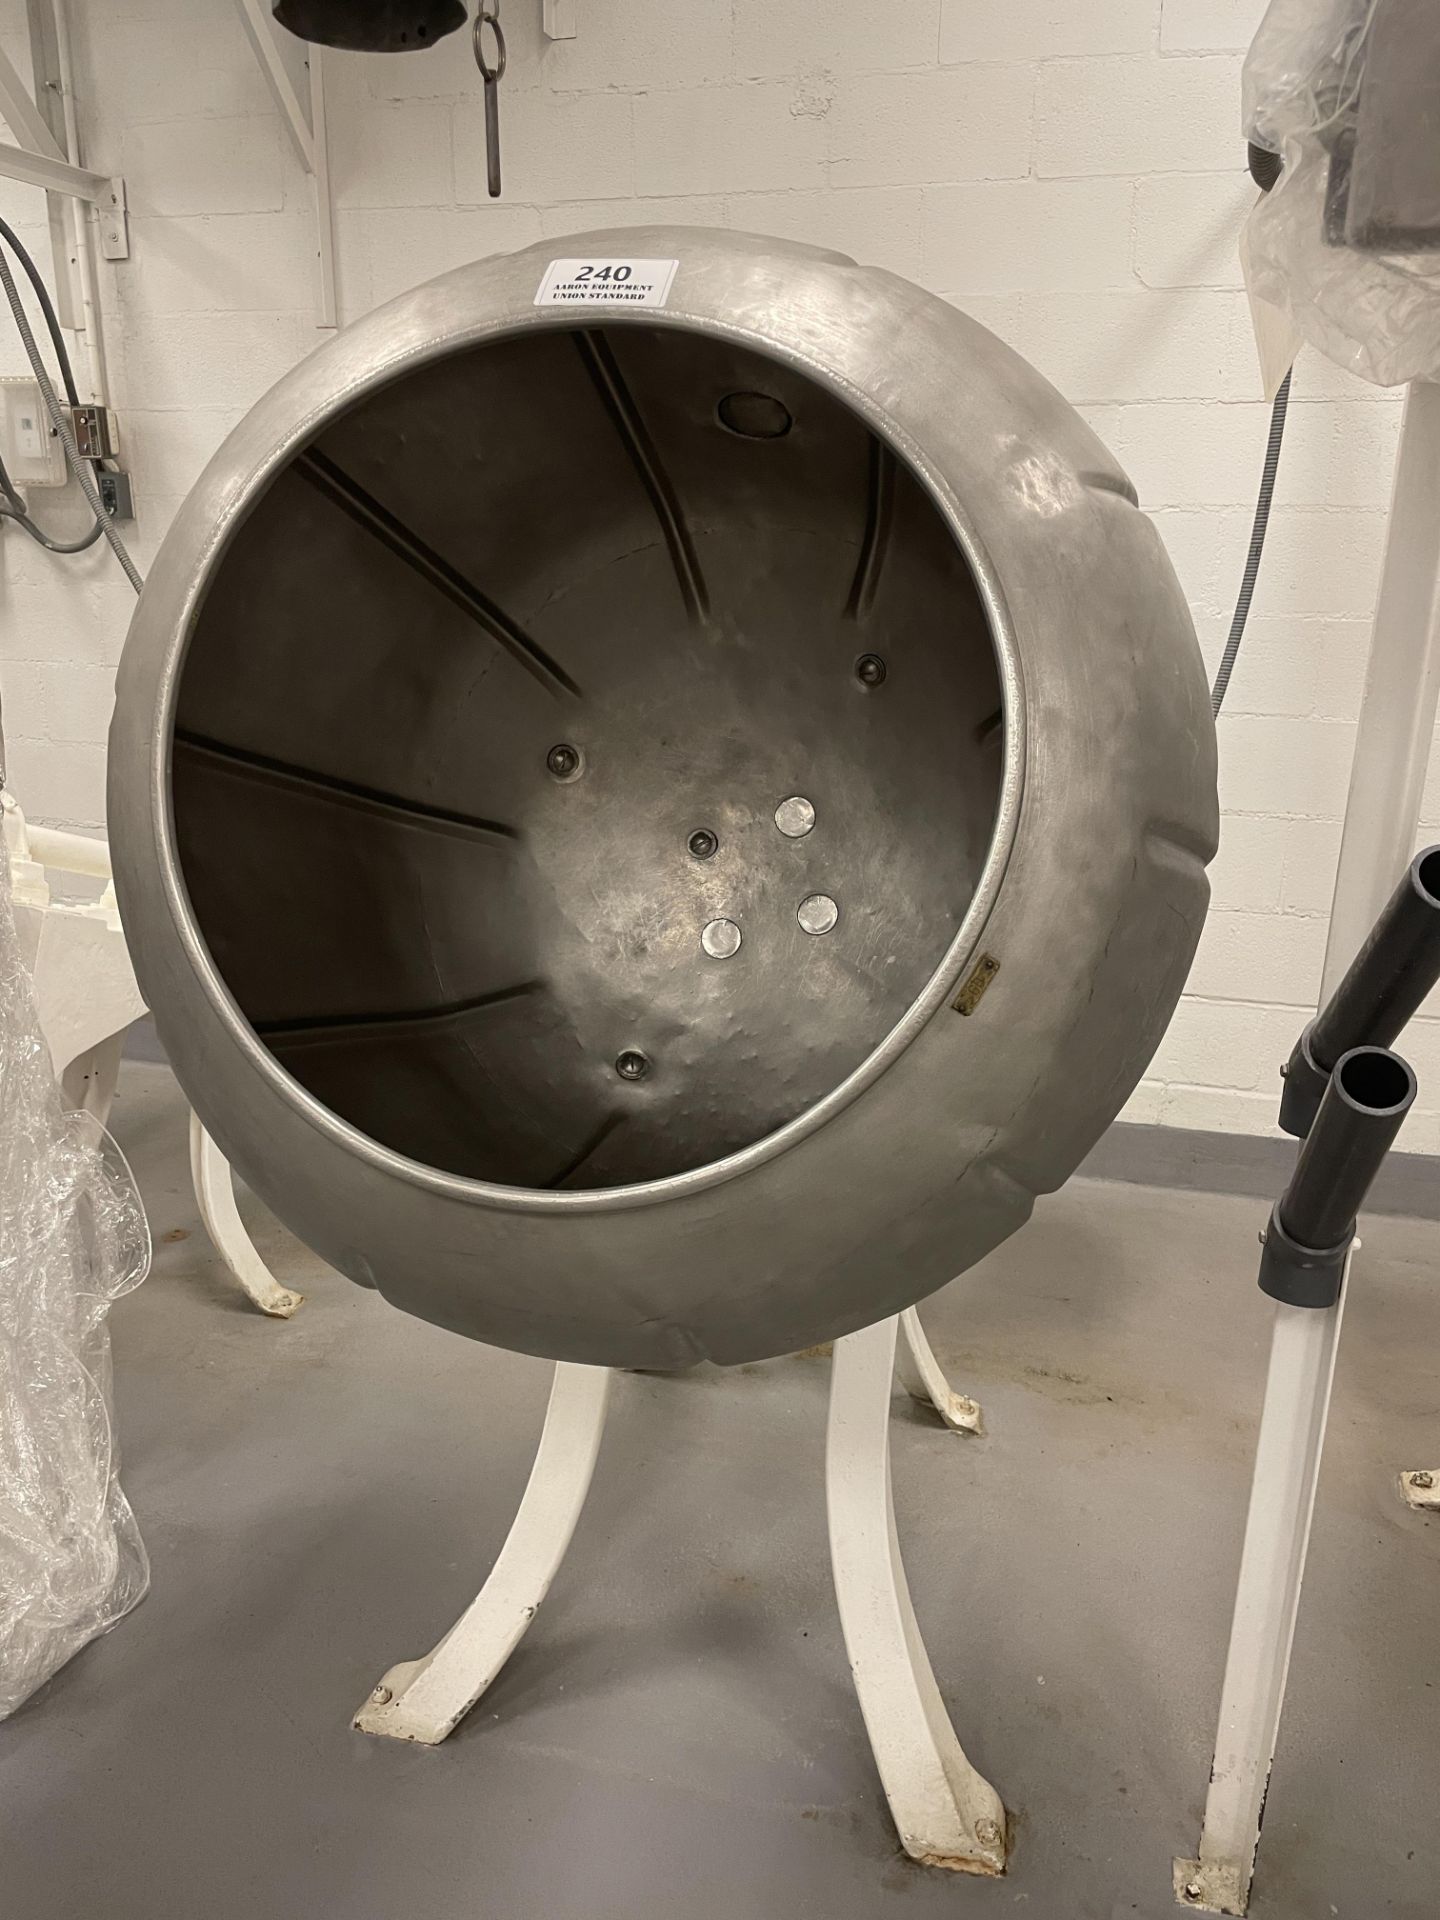 Asset 240 - 36" Diameter Stainless Steel Coating pan with pressed sanitary ribs with 34" deep x